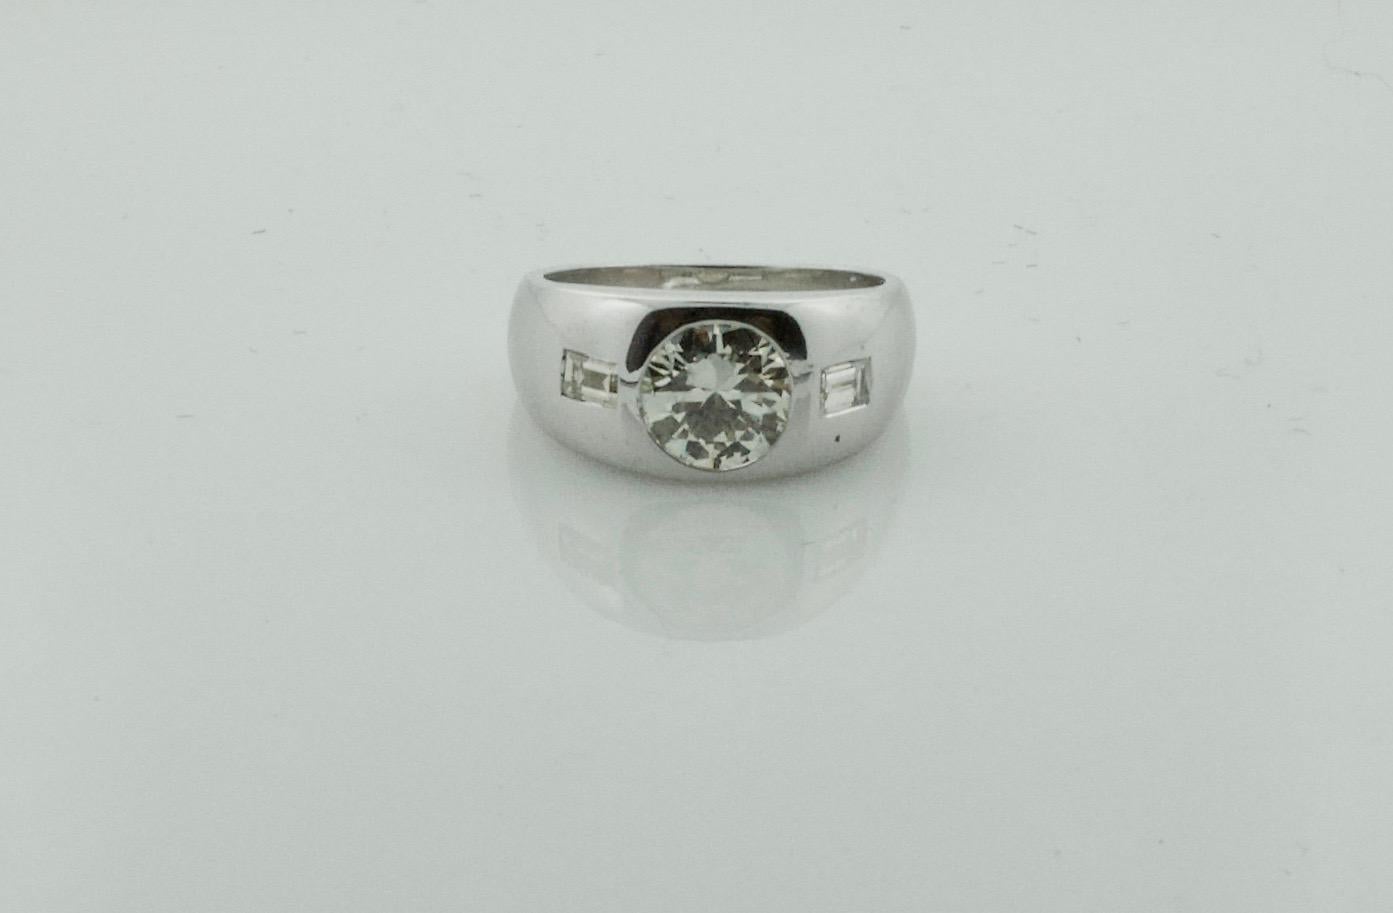 Retro High Low Transitional Cut Diamond Ring in Platinum, circa 1940s For Sale